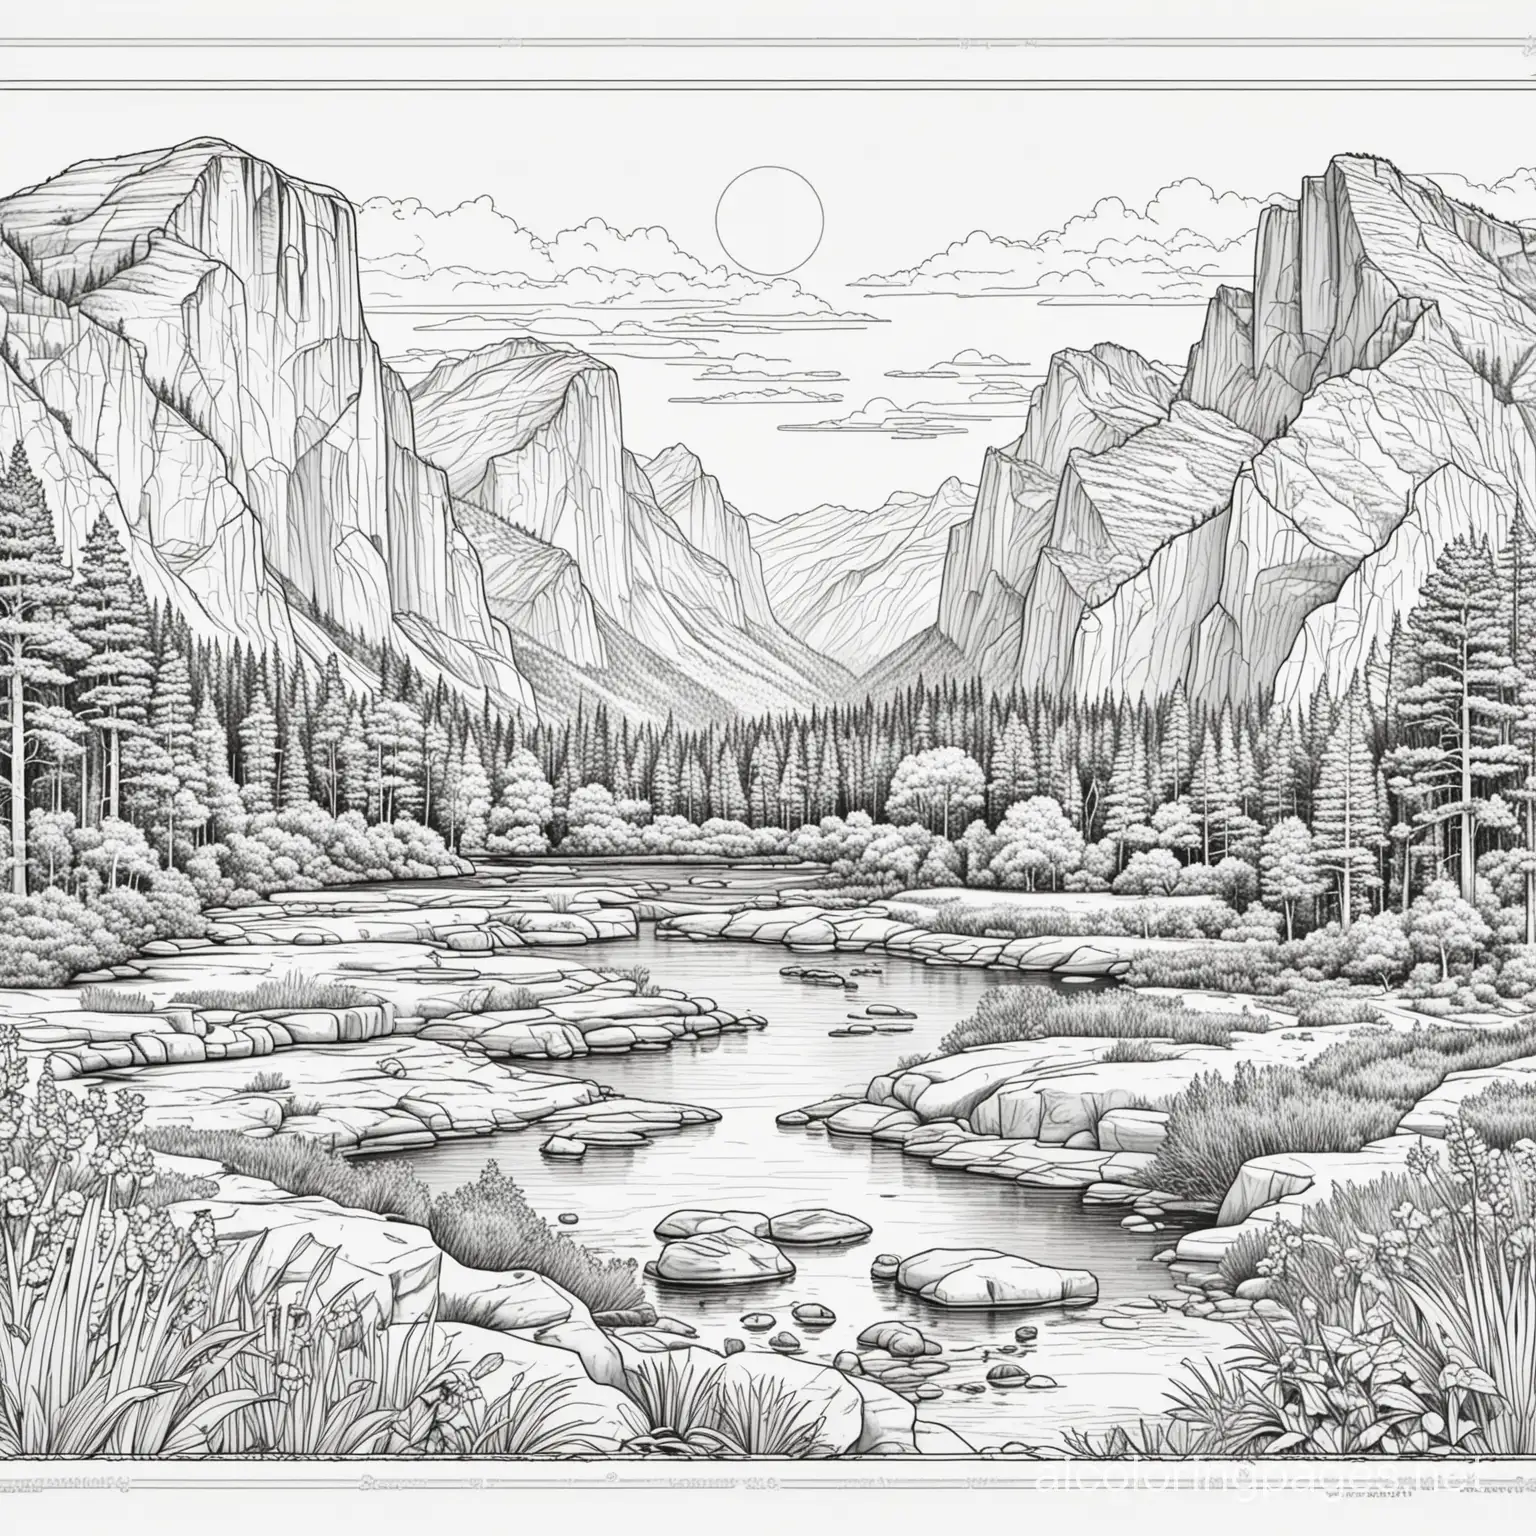 National parks of southeastern united states, Coloring Page, black and white, line art, white background, Simplicity, Ample White Space. The background of the coloring page is plain white to make it easy for young children to color within the lines. The outlines of all the subjects are easy to distinguish, making it simple for kids to color without too much difficulty